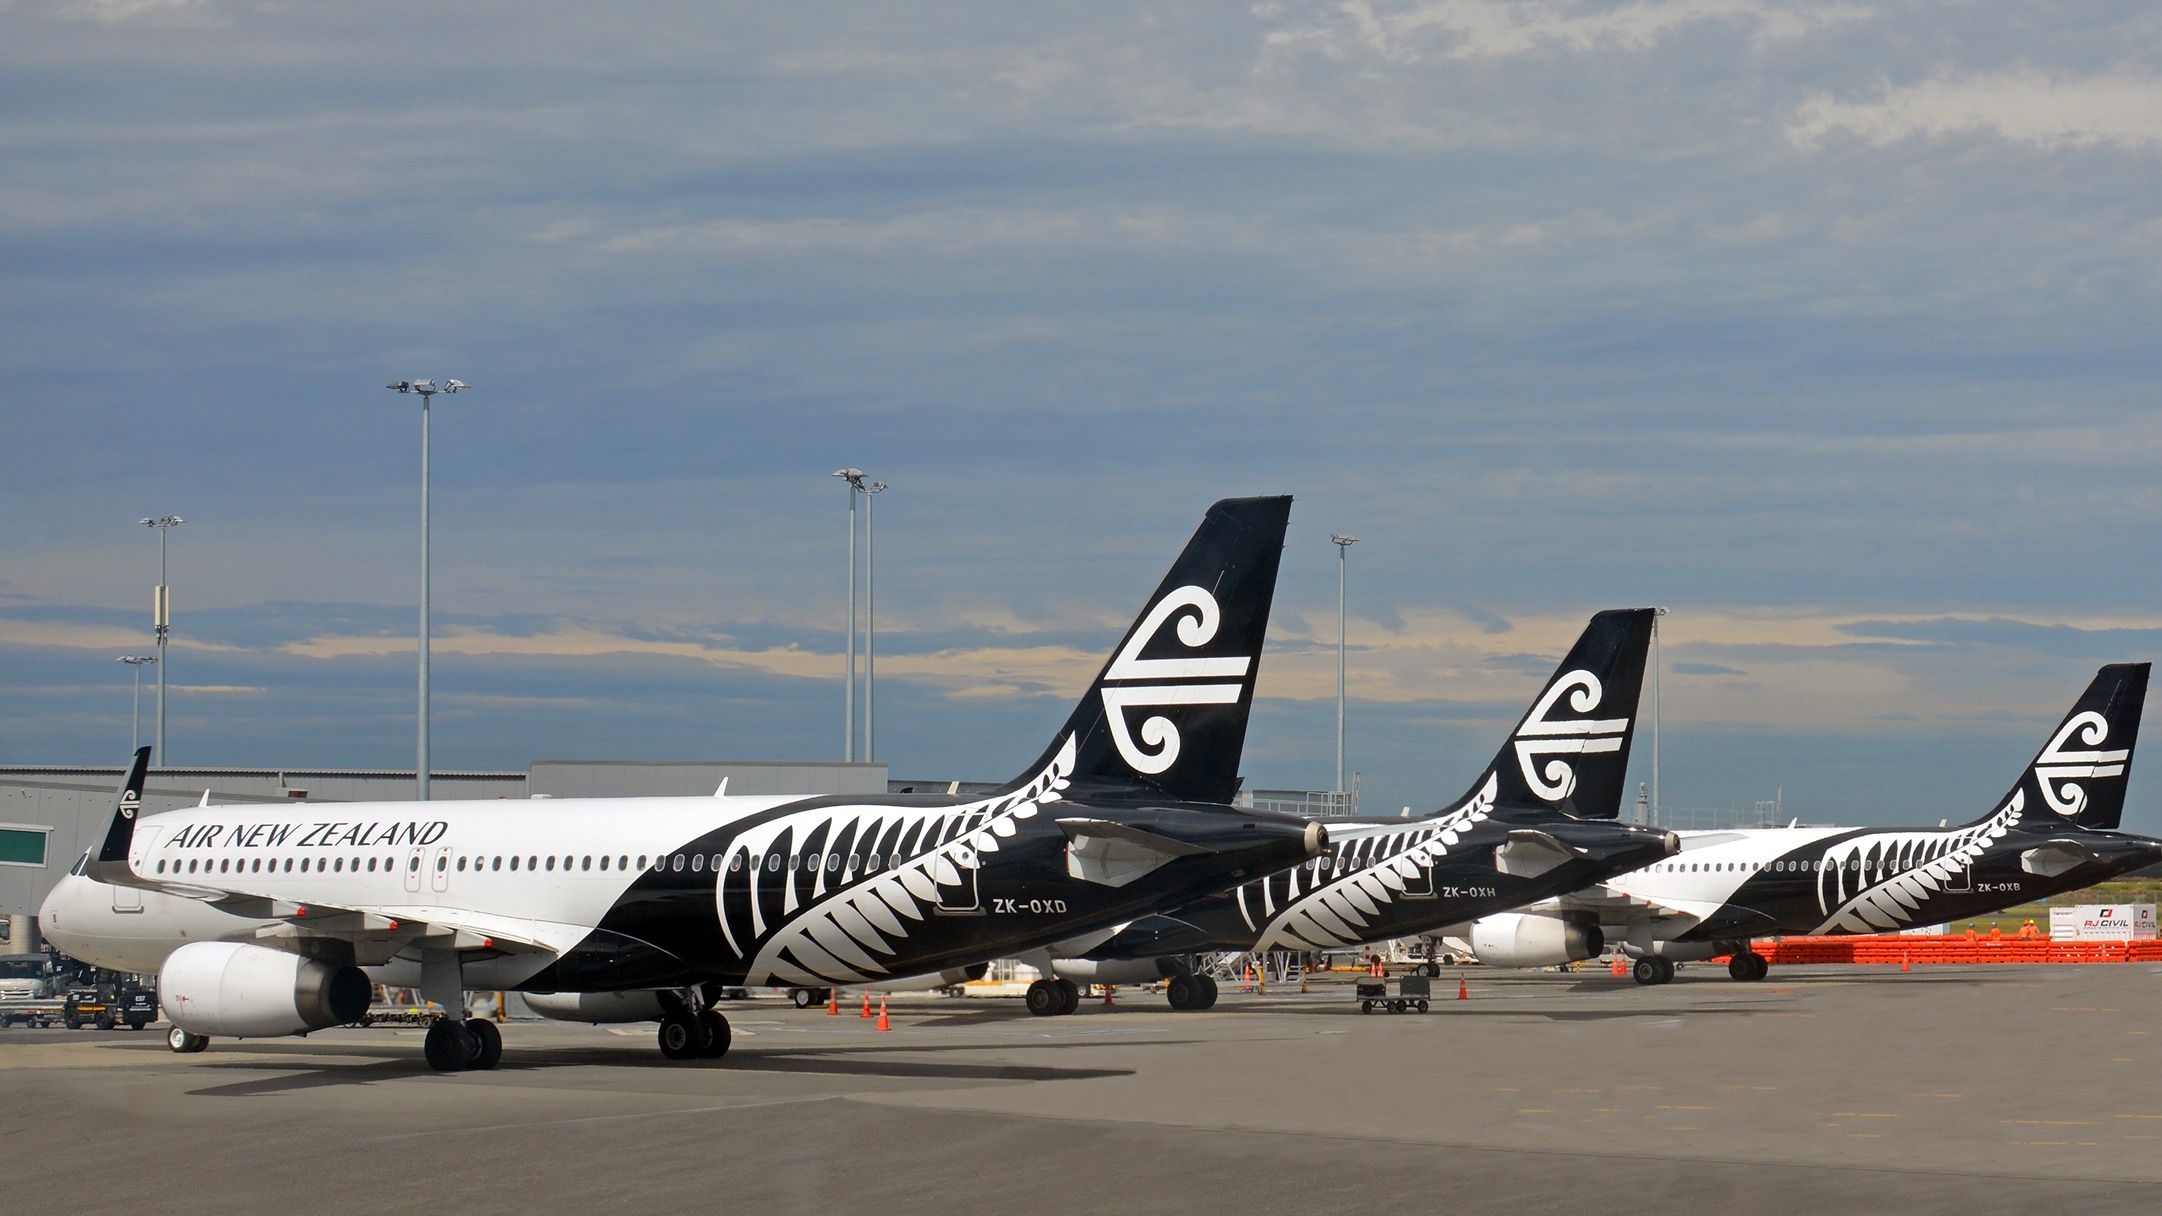 Three Air New Zealand aircraft parked on the apron at Christchurch Airport.